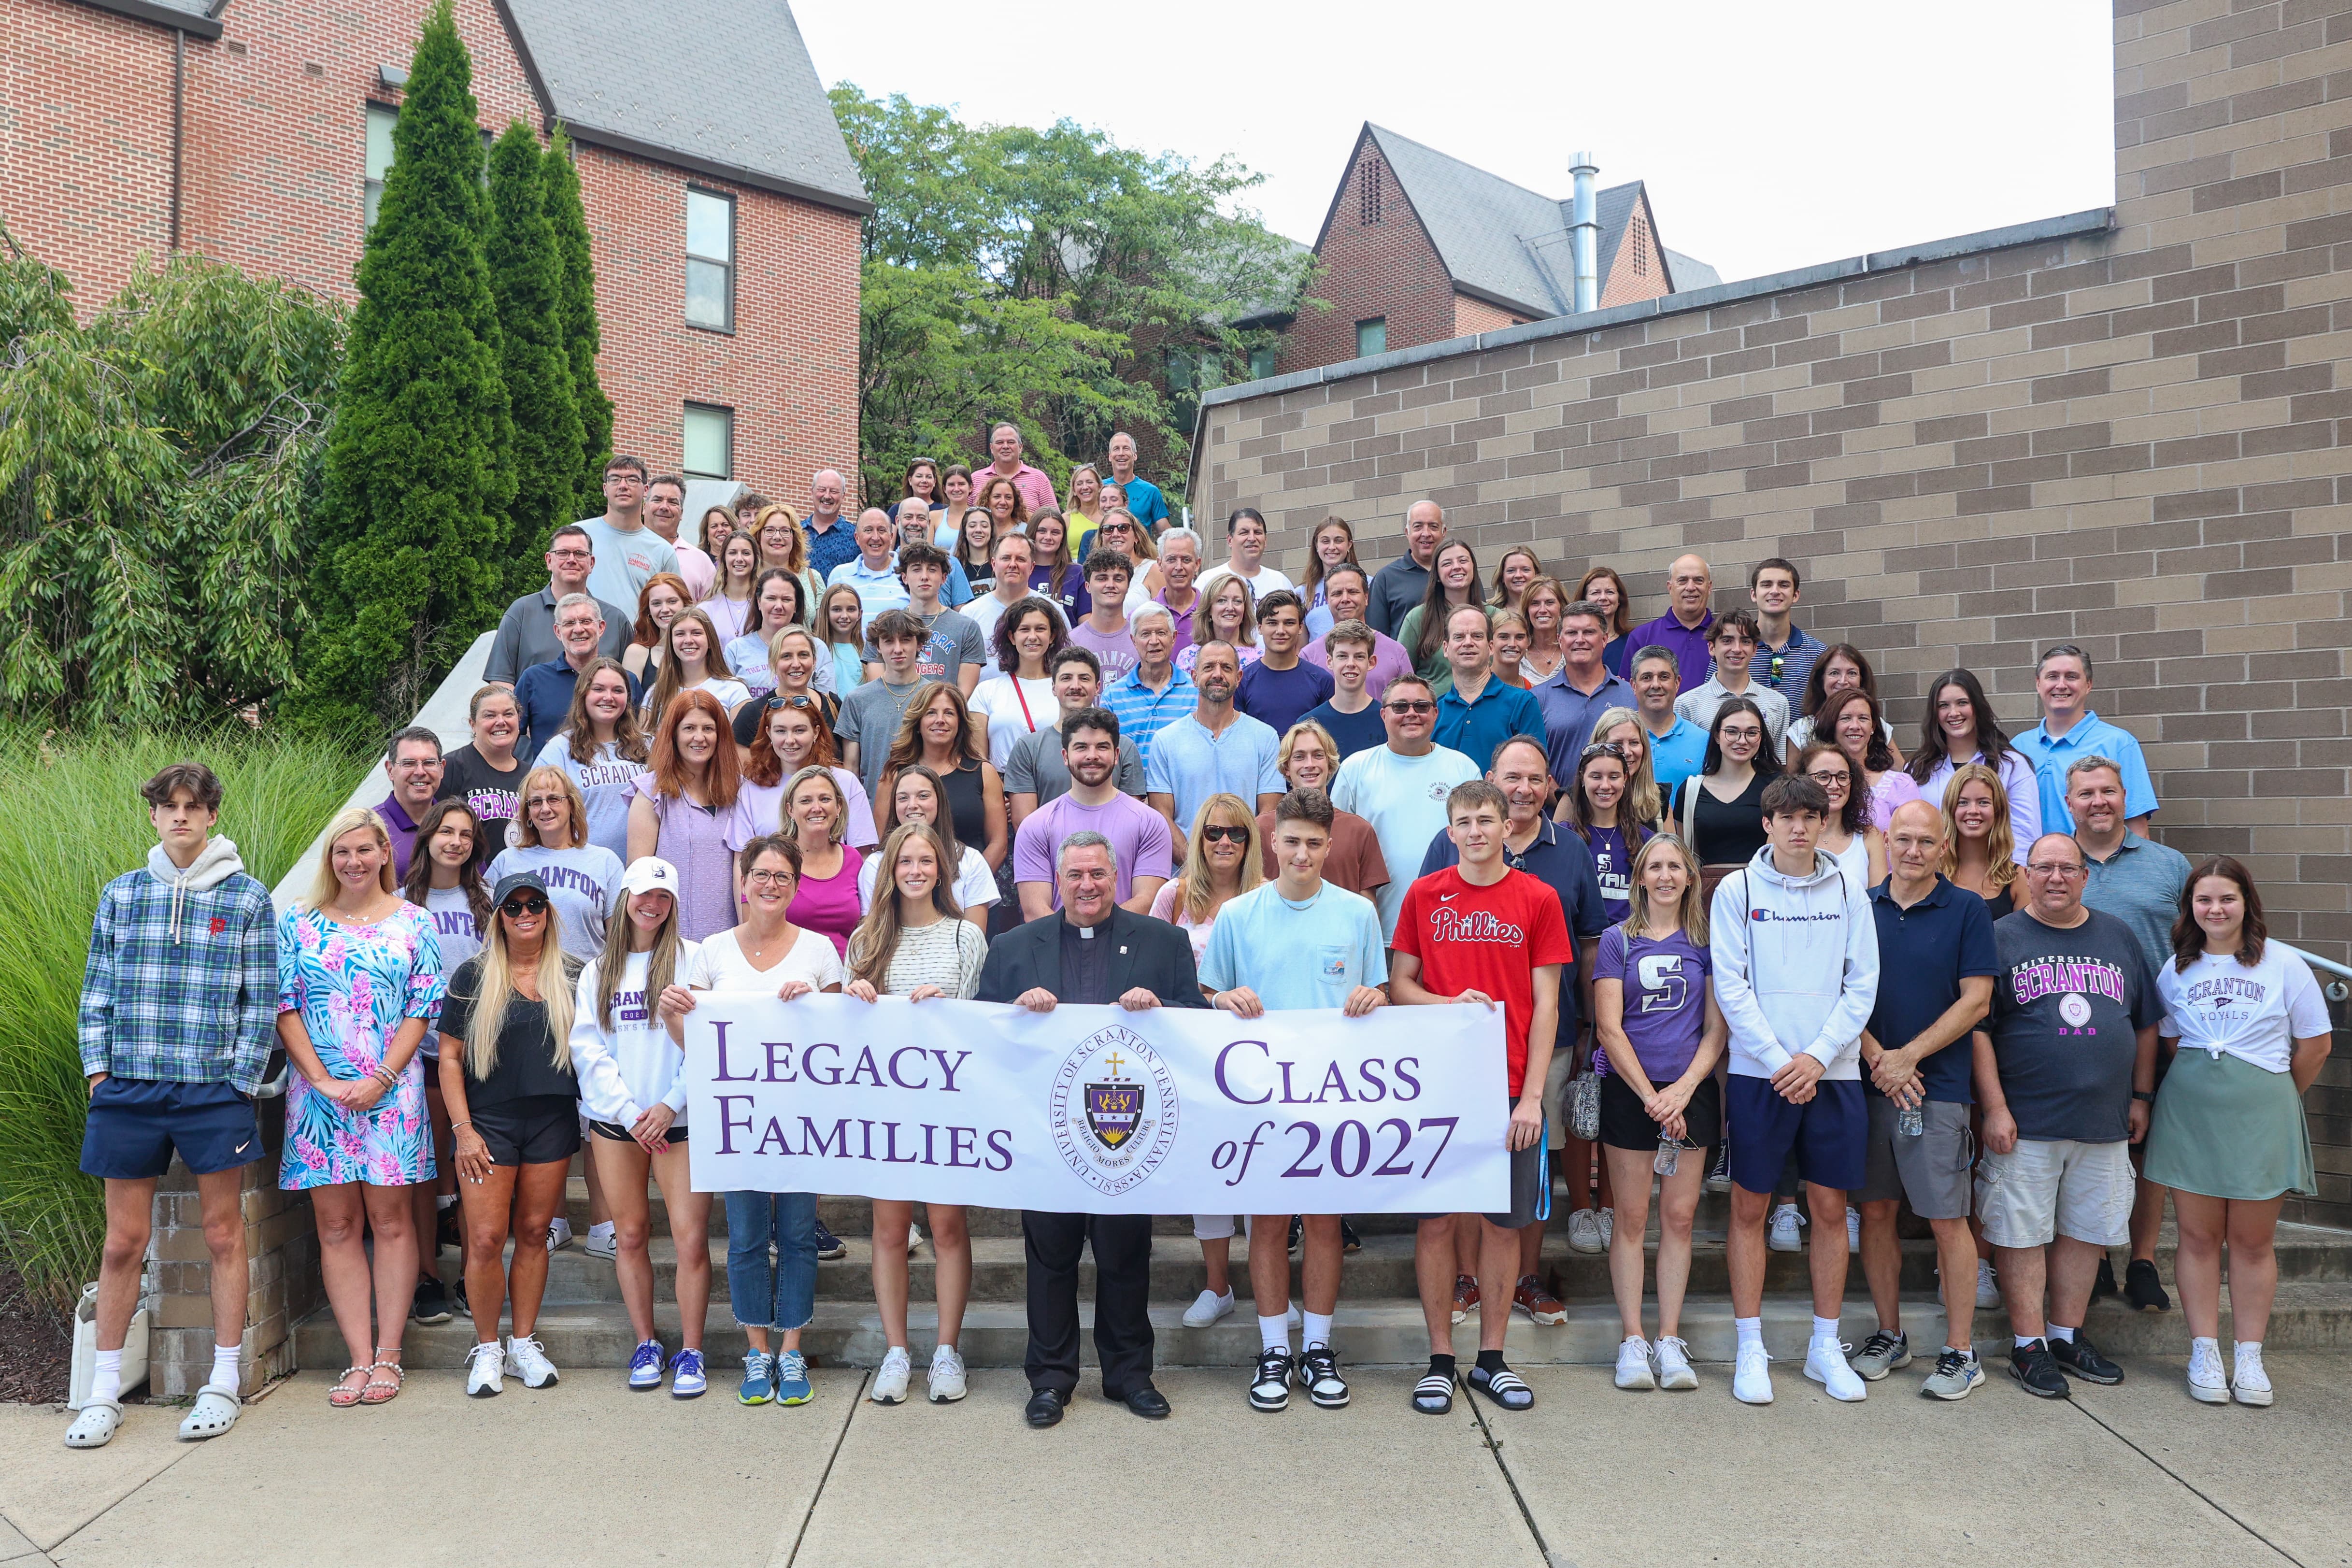 Scores of people pose together for a photo on the steps of Brennan Hall at The University of Scranton.